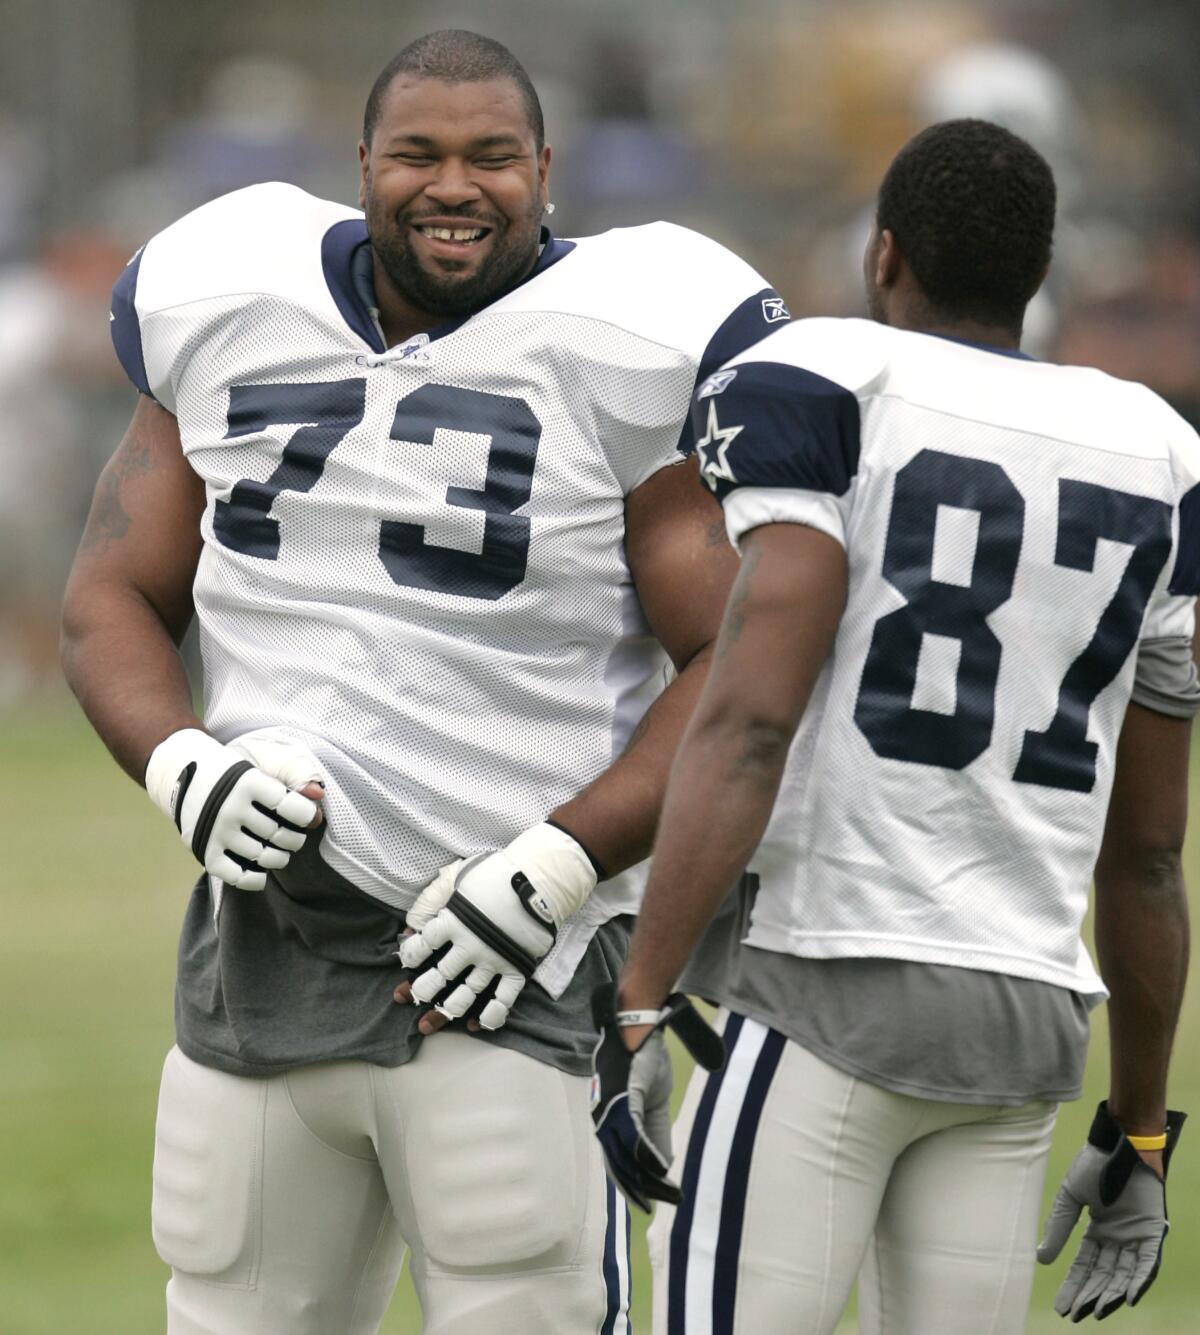 Dallas Cowboys guard Larry Allen shares a laugh with teammate Zuriel Smith during training camp in Oxnard.